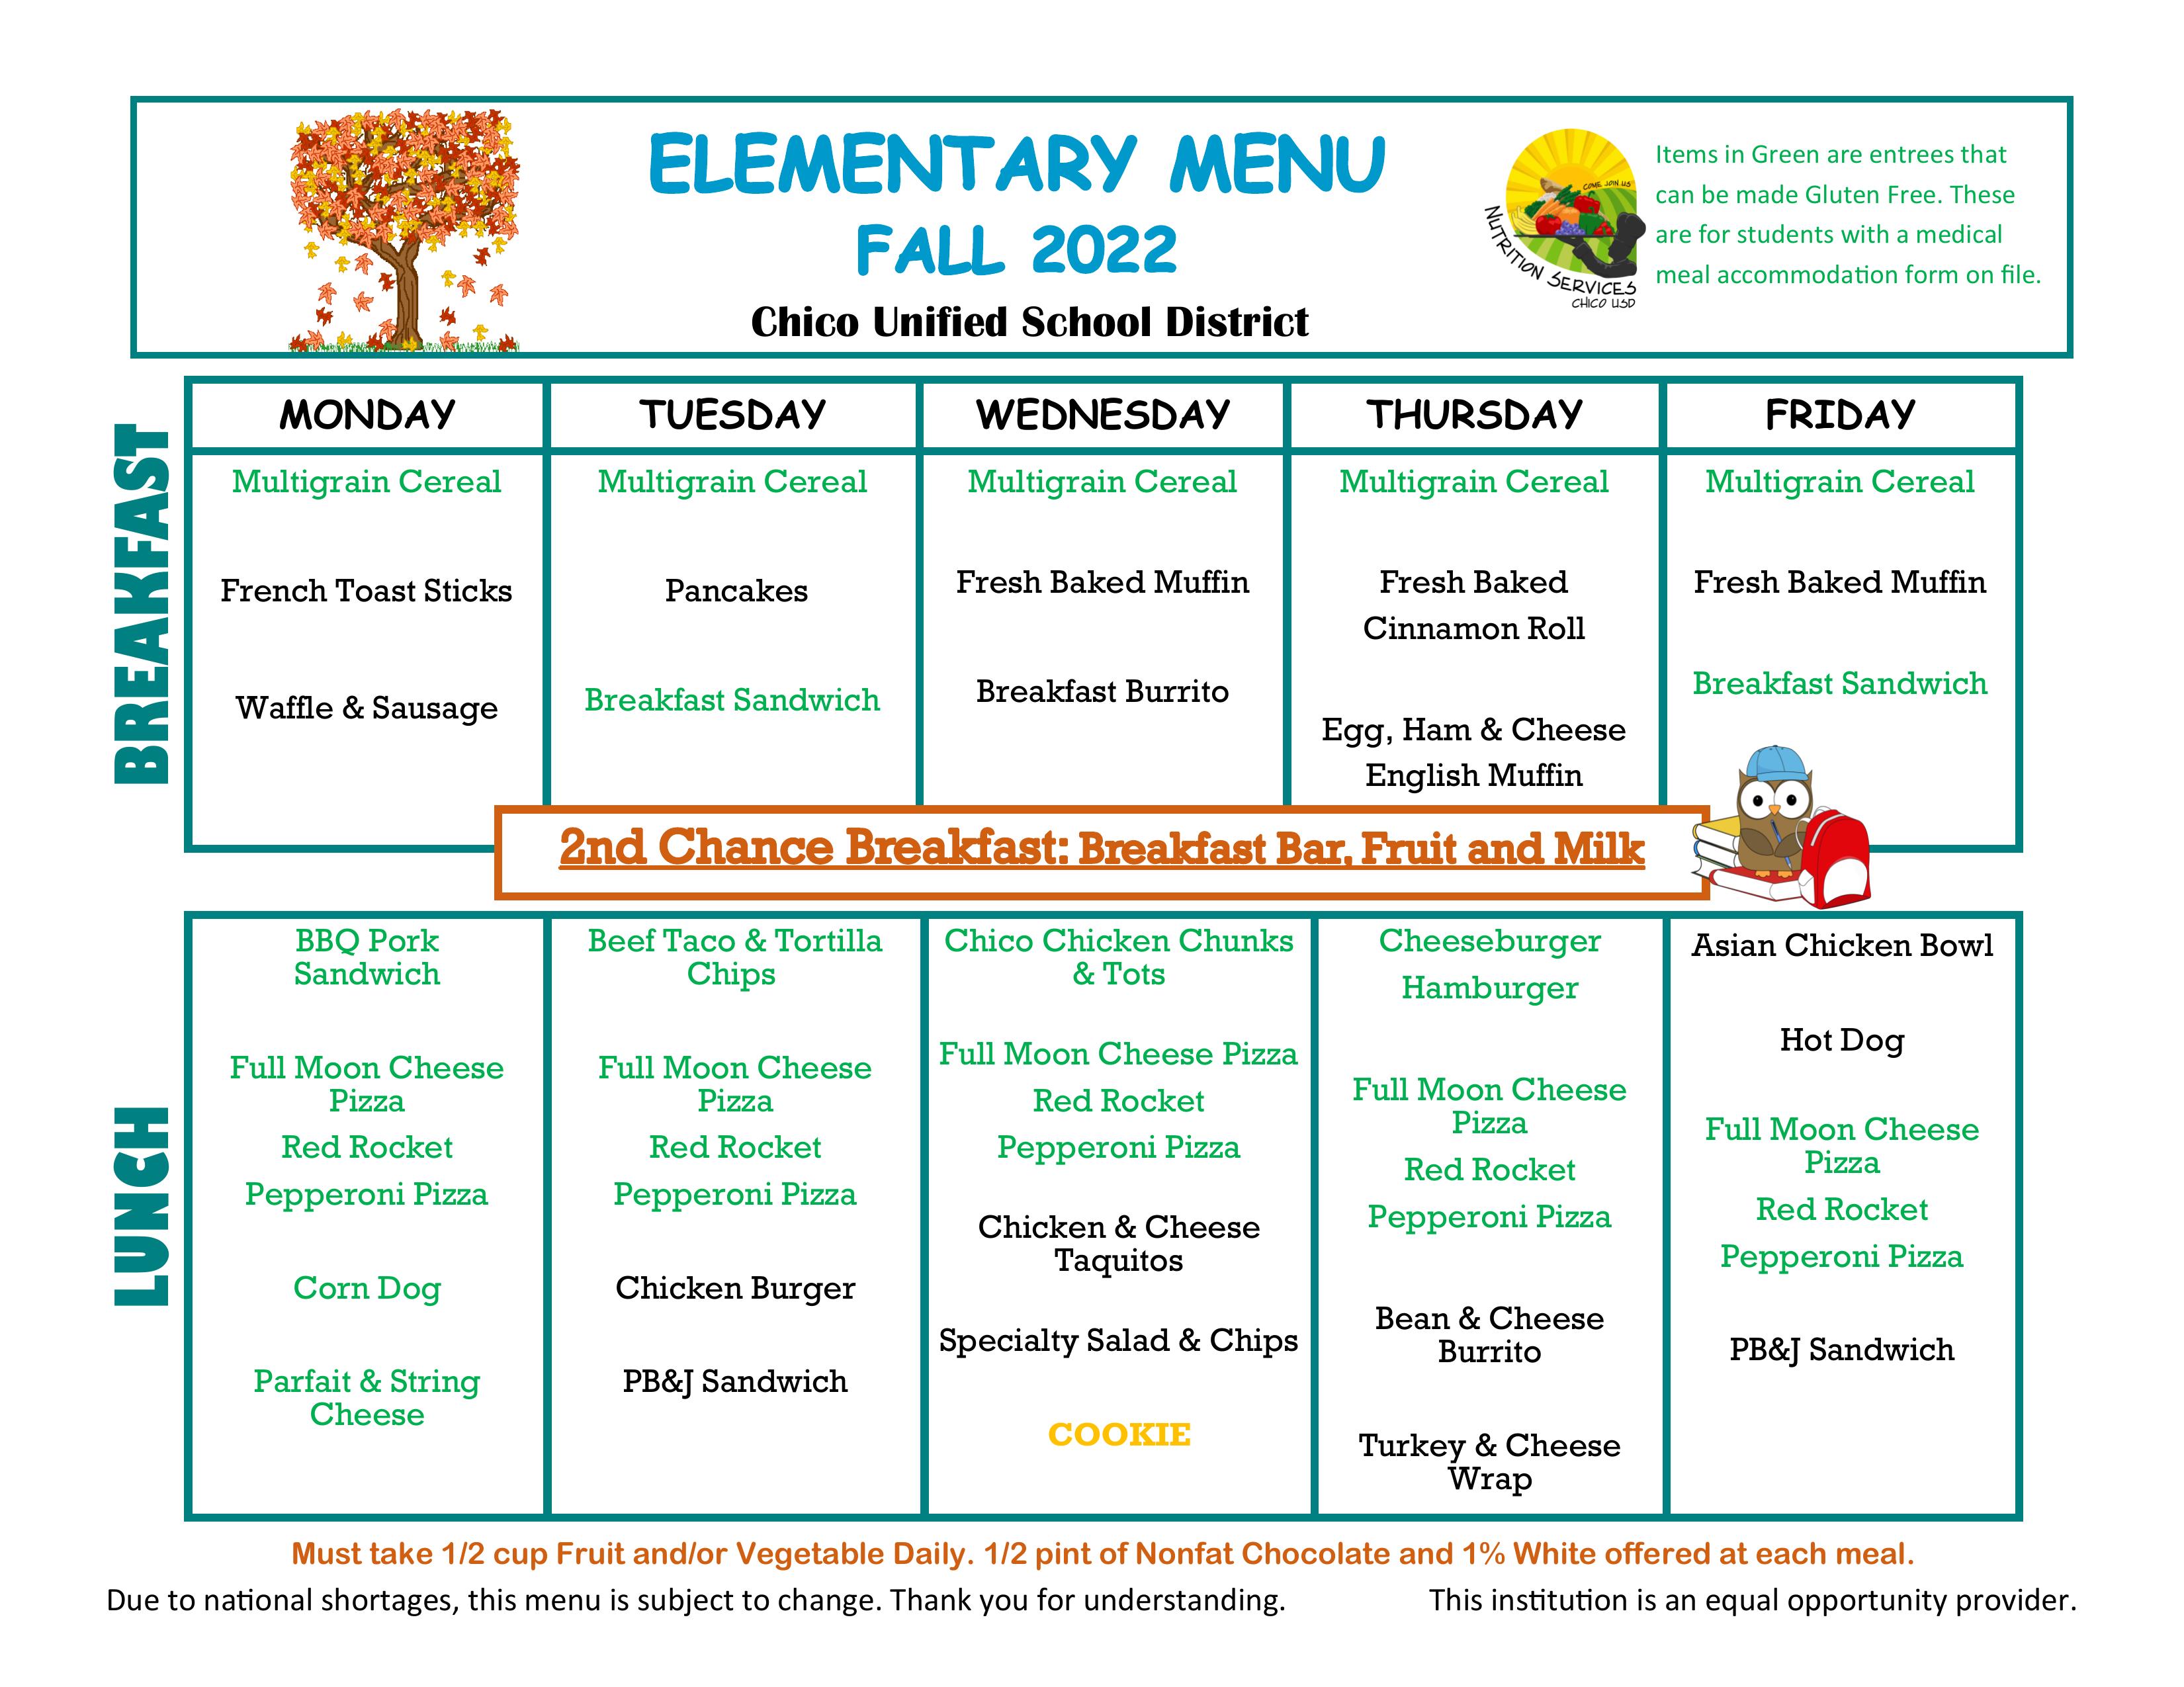 Parkview Elementary School Nutrition Services